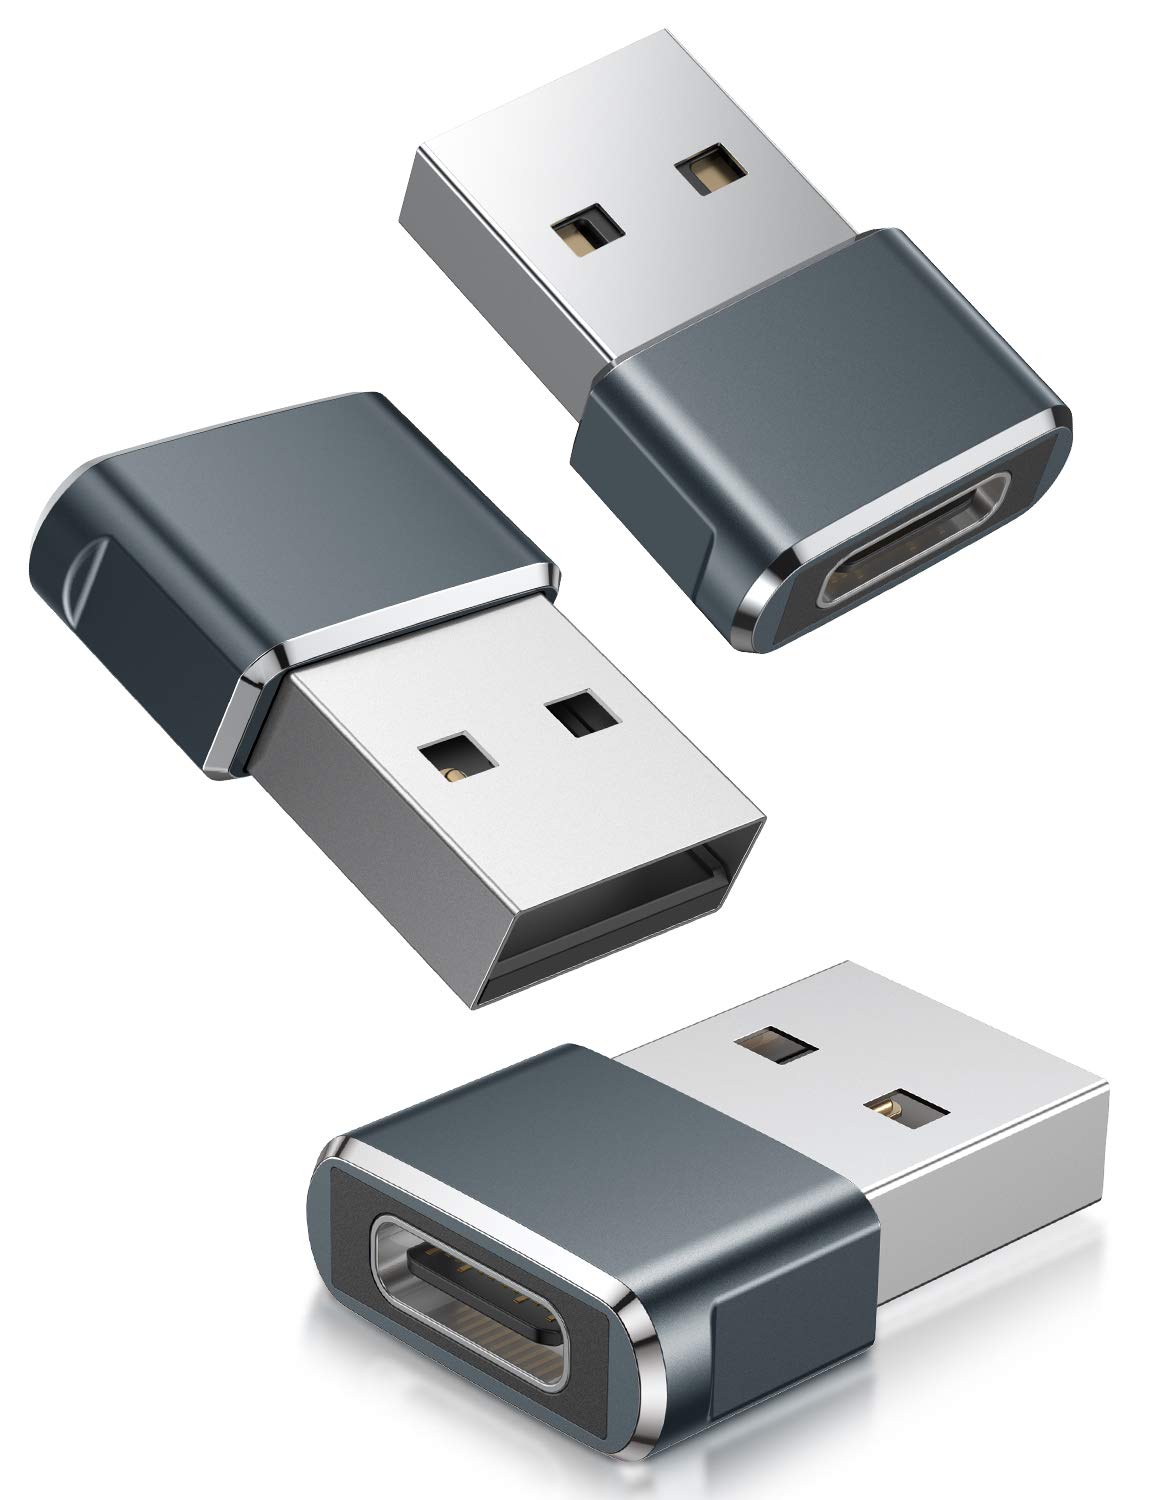 3-Pack Basesailor USB A to USB C Adapter (Grey) $3.50 + Free Shipping w/ Prime or $35+ orders